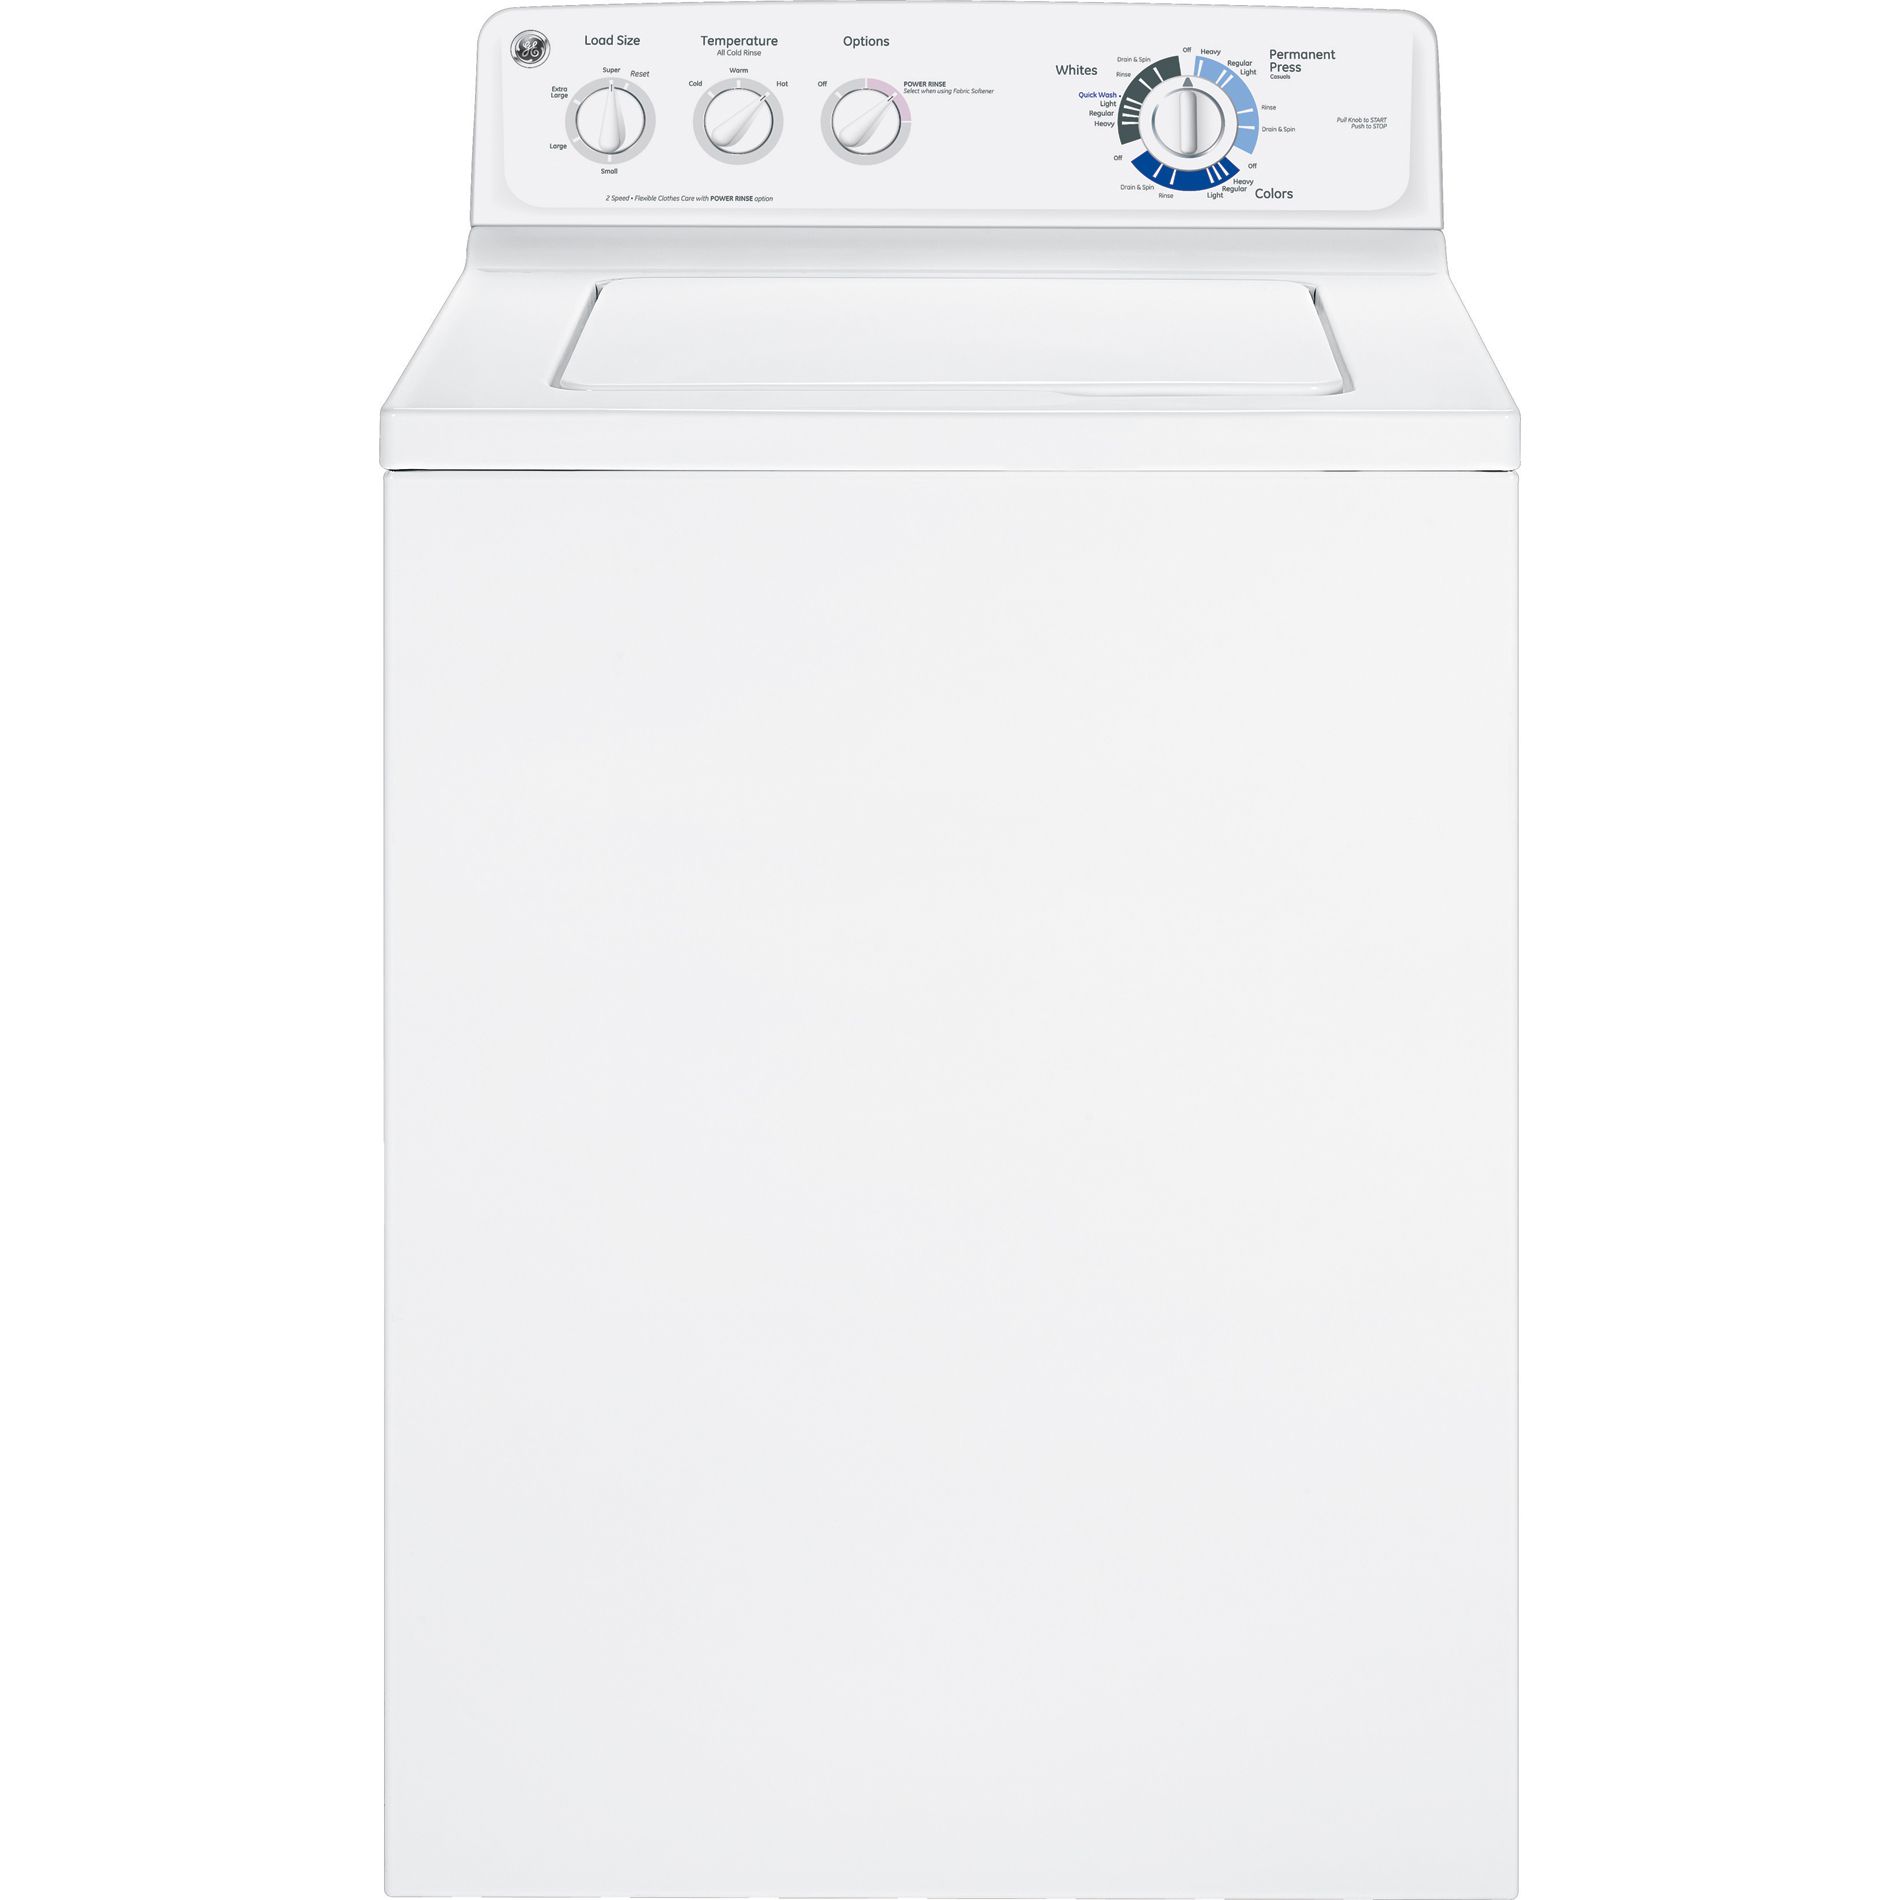 GE 3.7 cu. ft. Top Load Washer - White